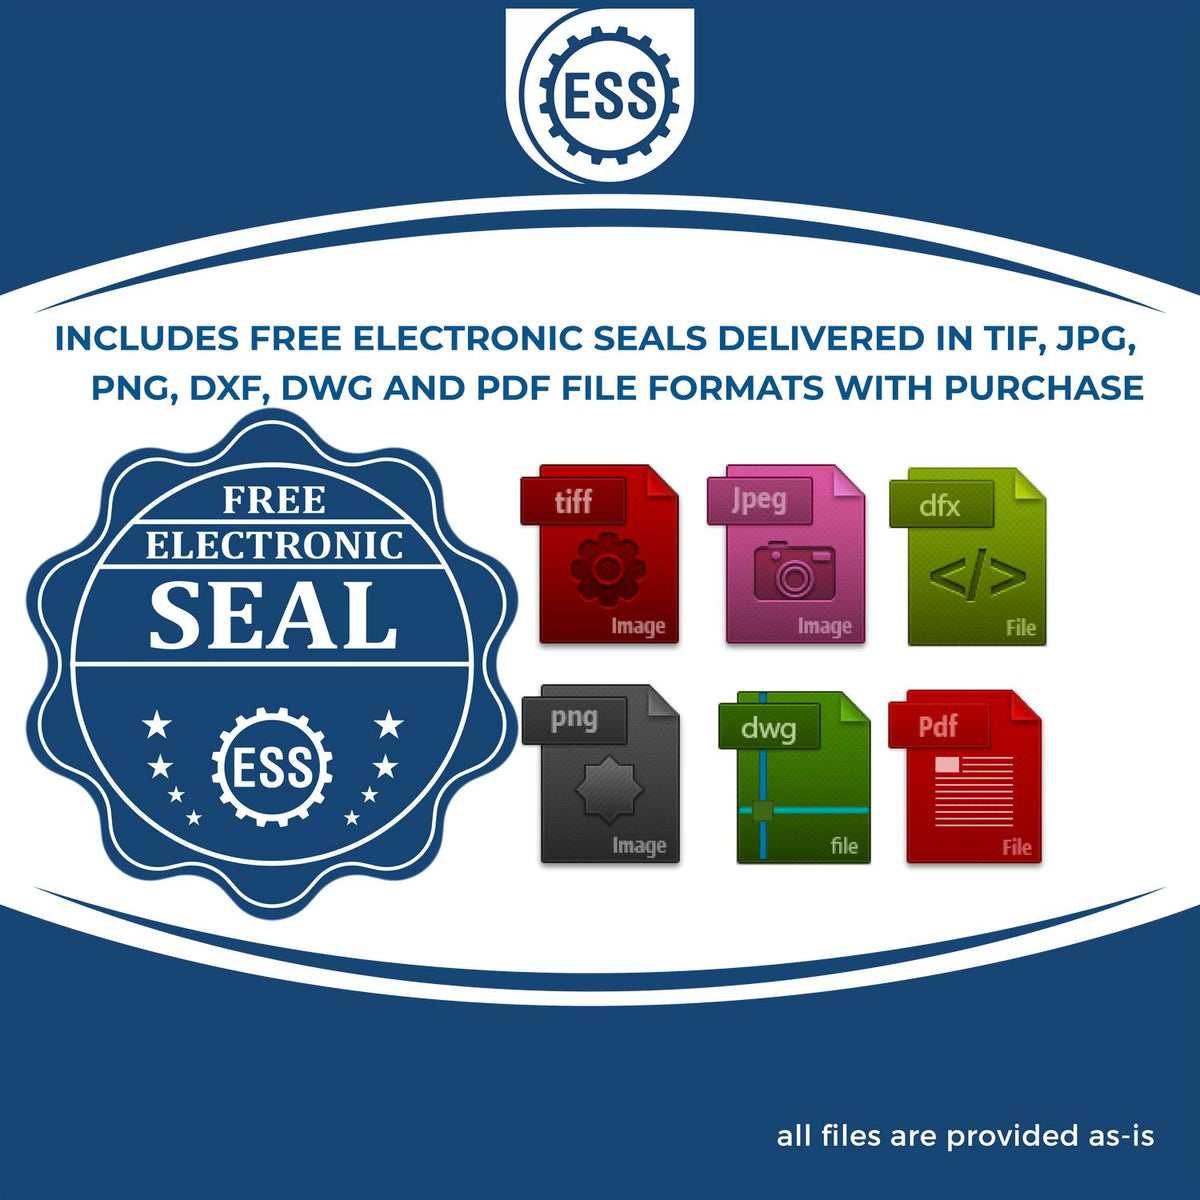 An infographic for the free electronic seal for the Premium MaxLight Pre-Inked Idaho Engineering Stamp illustrating the different file type icons such as DXF, DWG, TIF, JPG and PNG.